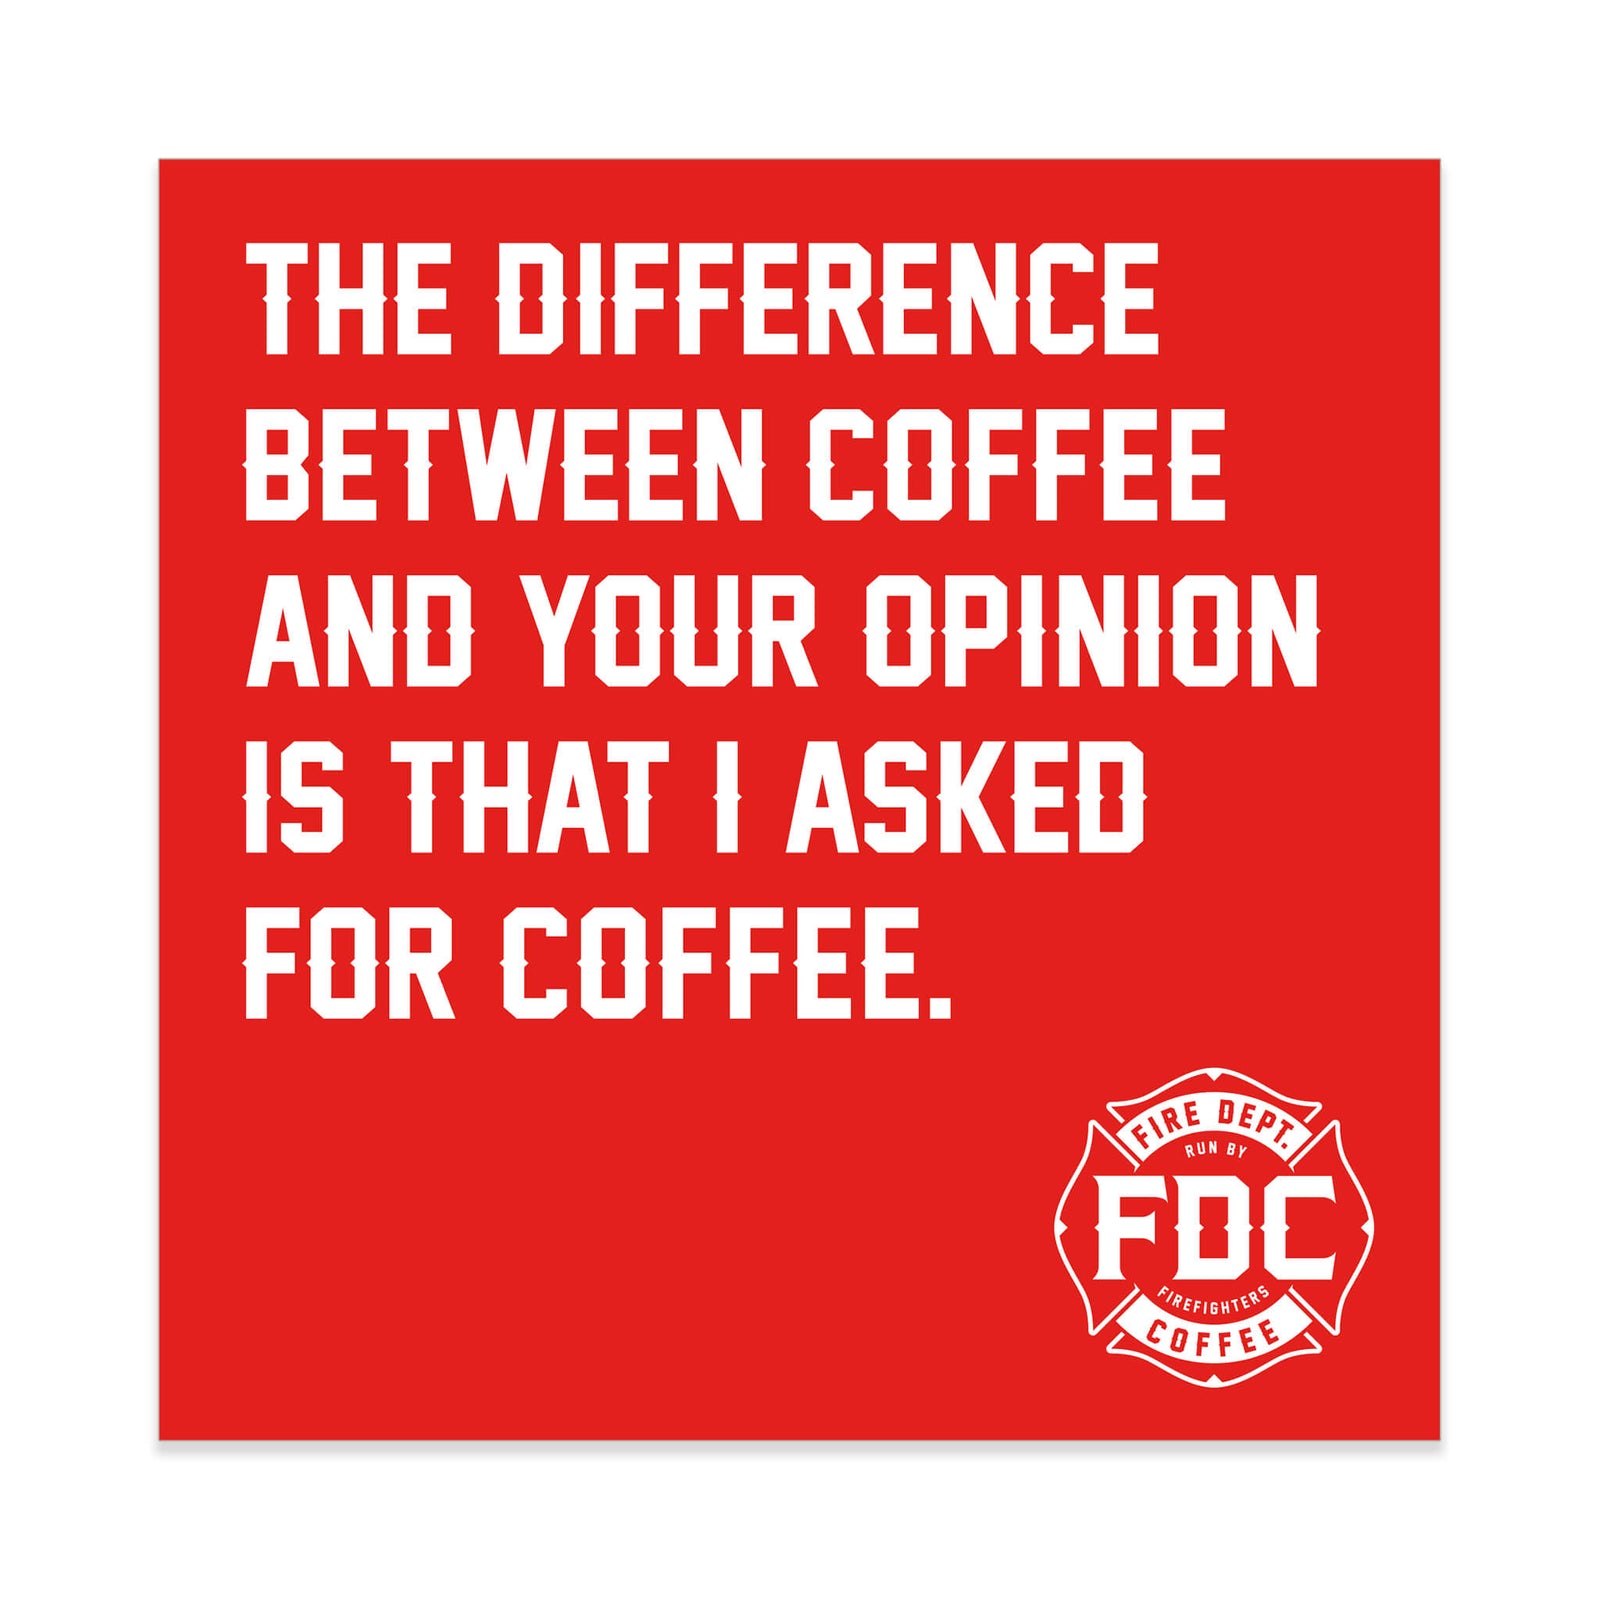 Red square sticker that says in white lettering "The difference between coffee and your opinion is that I asked for coffee." FDC Maltese Cross logo is in the bottom right corner.